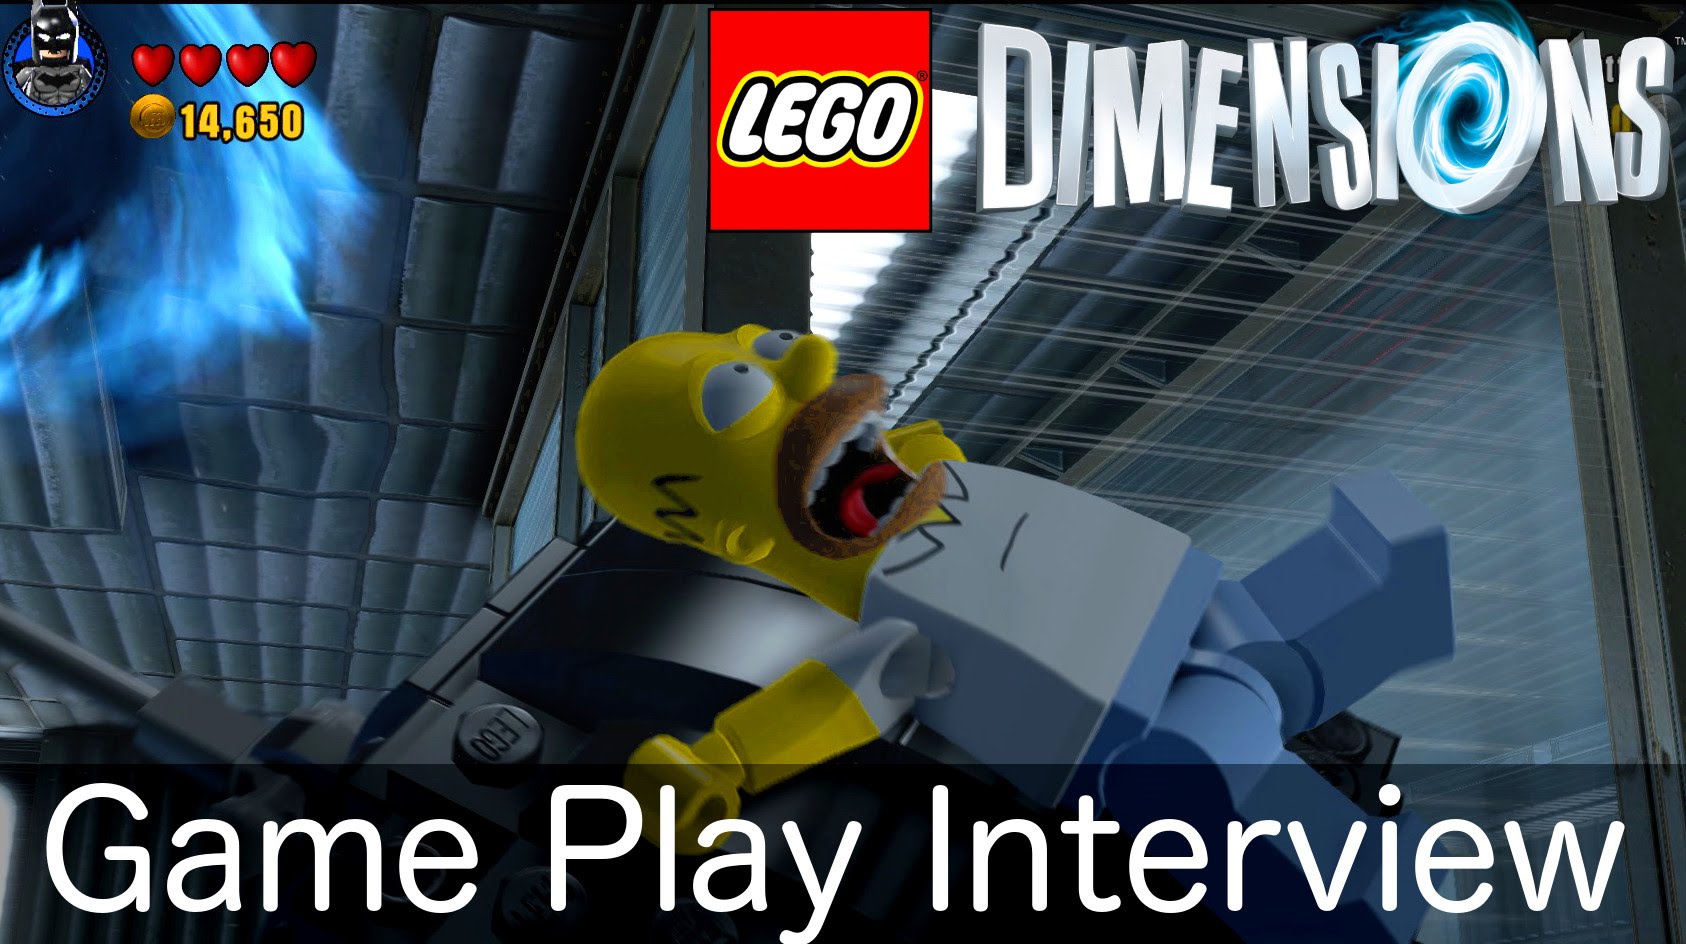 Featured Image for Lego Dimensions Game-Play Interview 